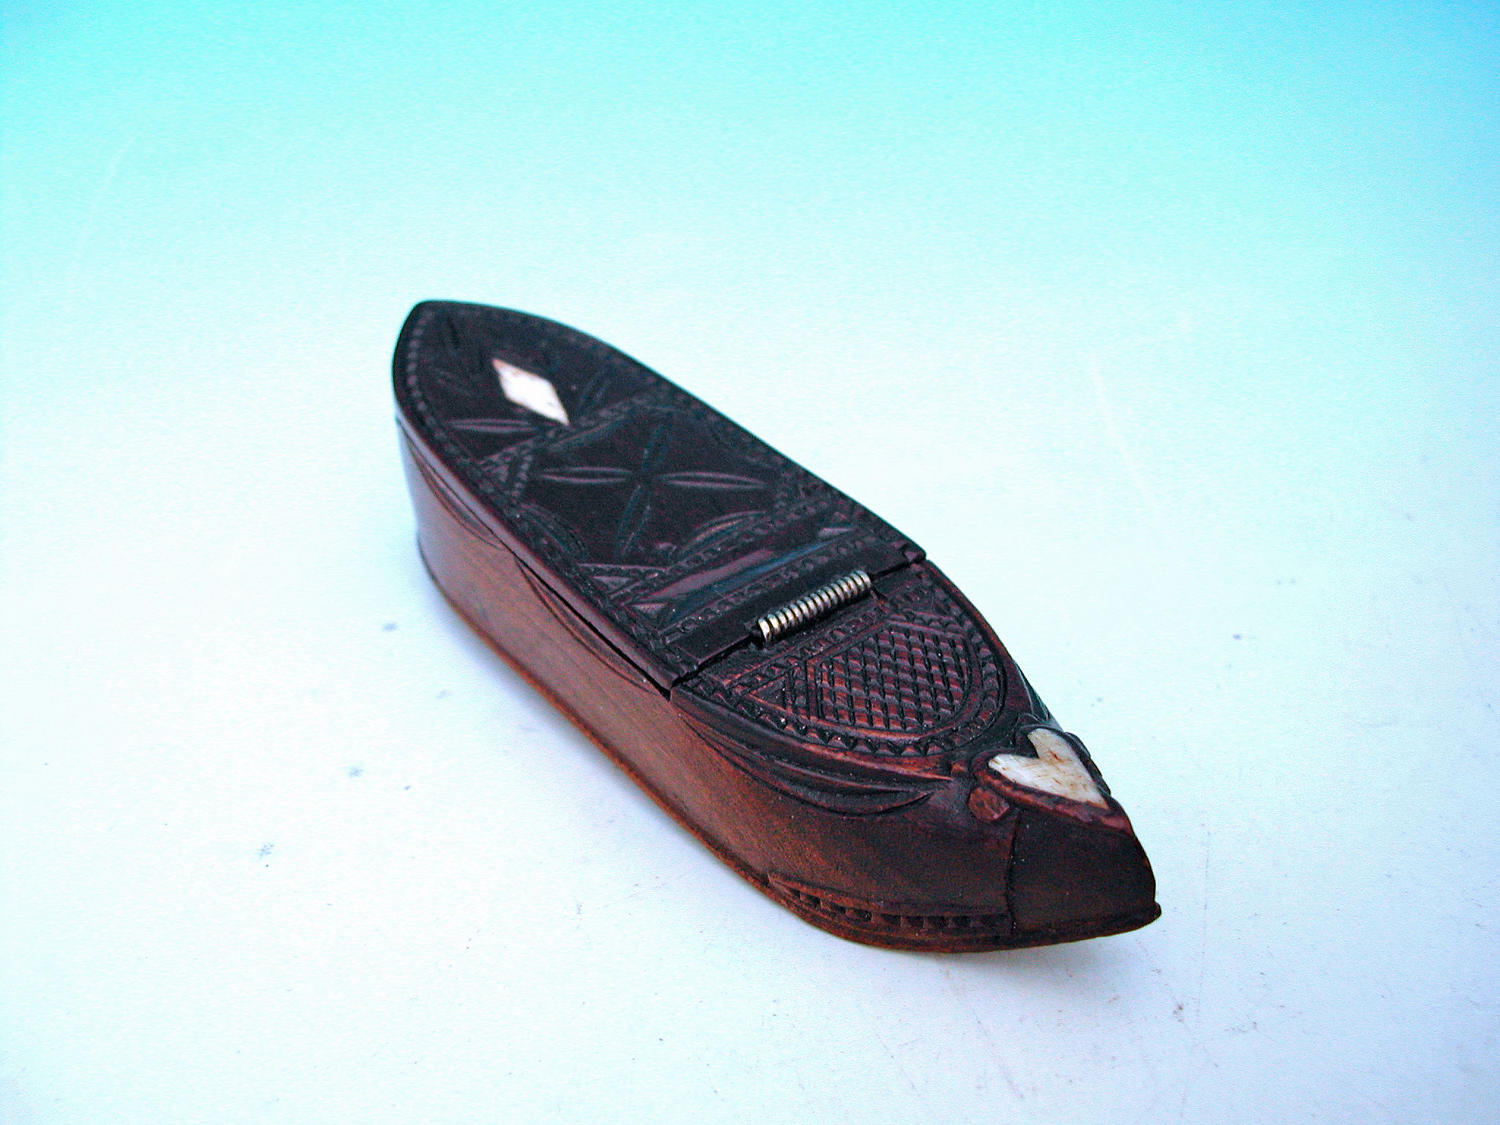 Antique 19thc Inlaid Carved Snuff Shoe. Continental. C1850-70